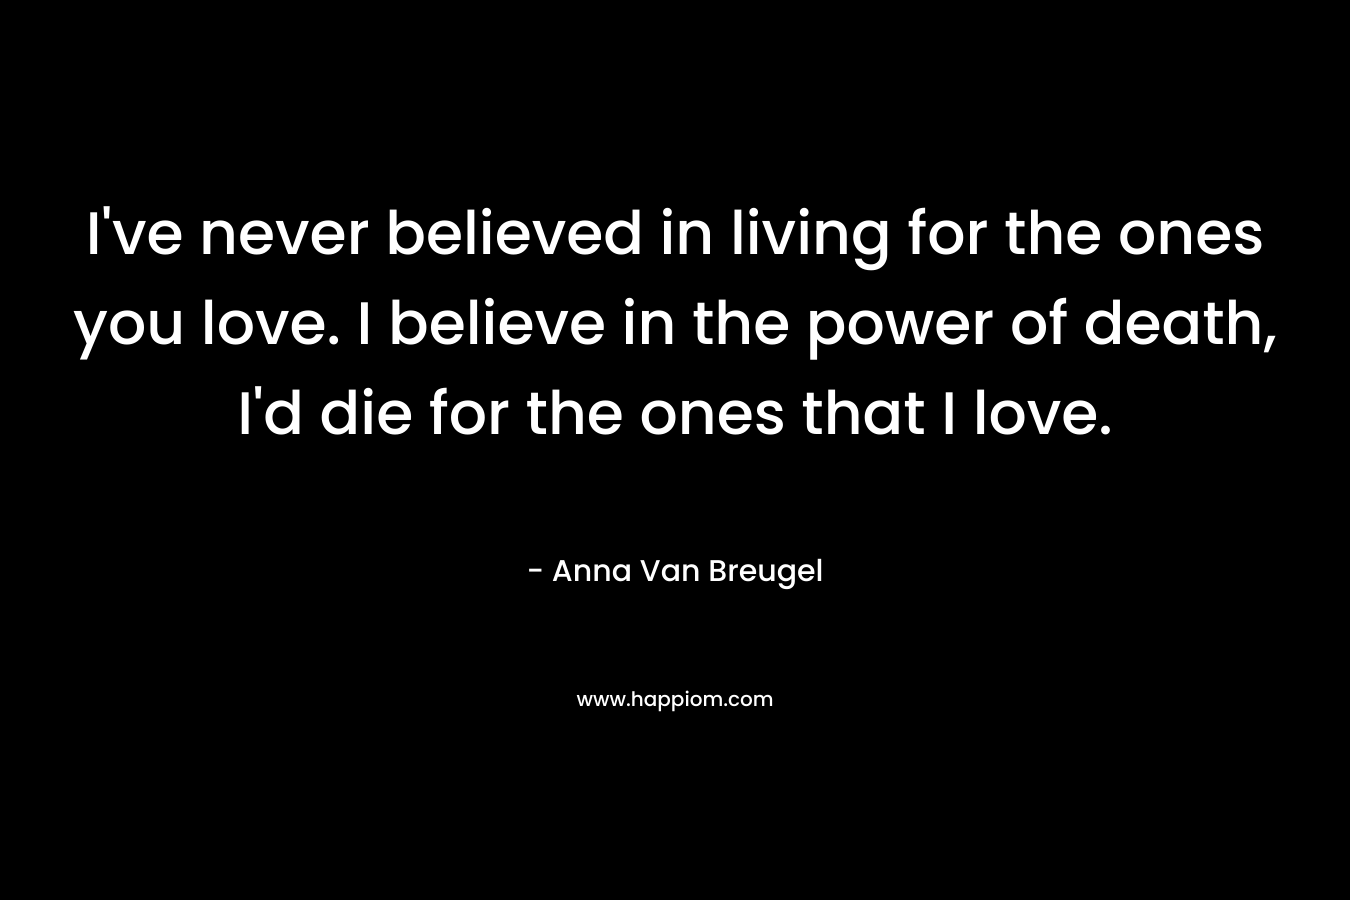 I've never believed in living for the ones you love. I believe in the power of death, I'd die for the ones that I love.